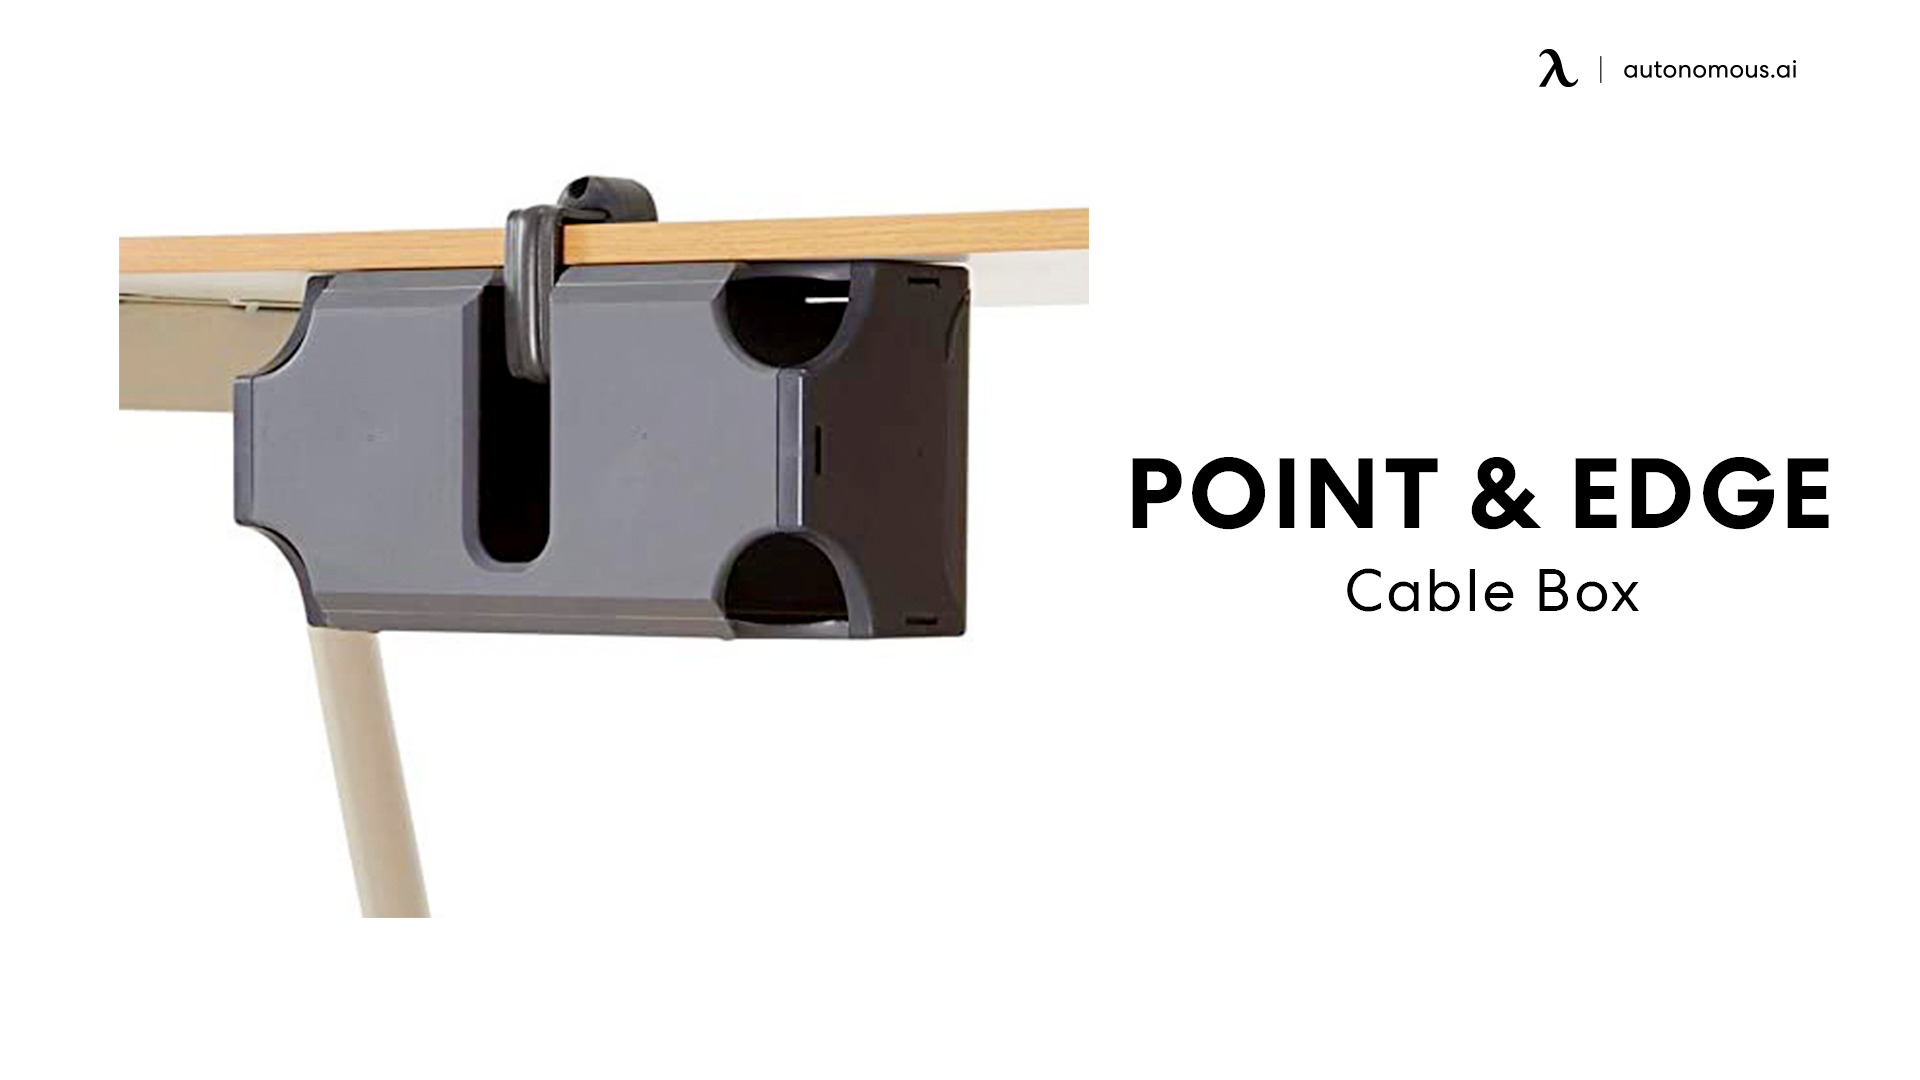 Cable Box by Point & Edge